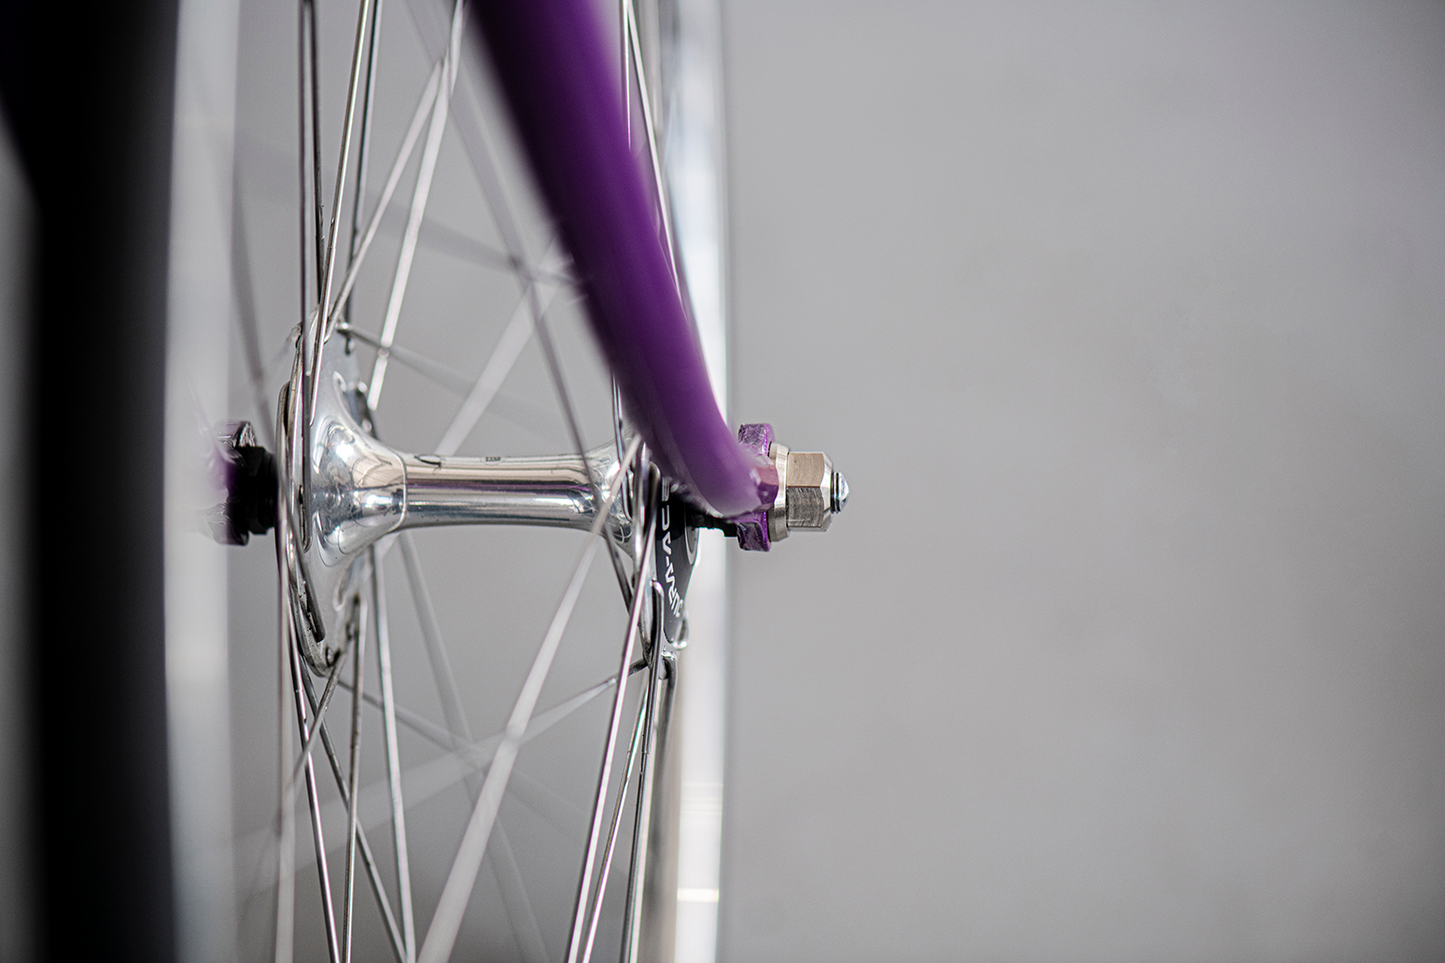 Perfomance track axle nuts by Runwell, M10, Black nut, Silver on a purple NJS bike fork